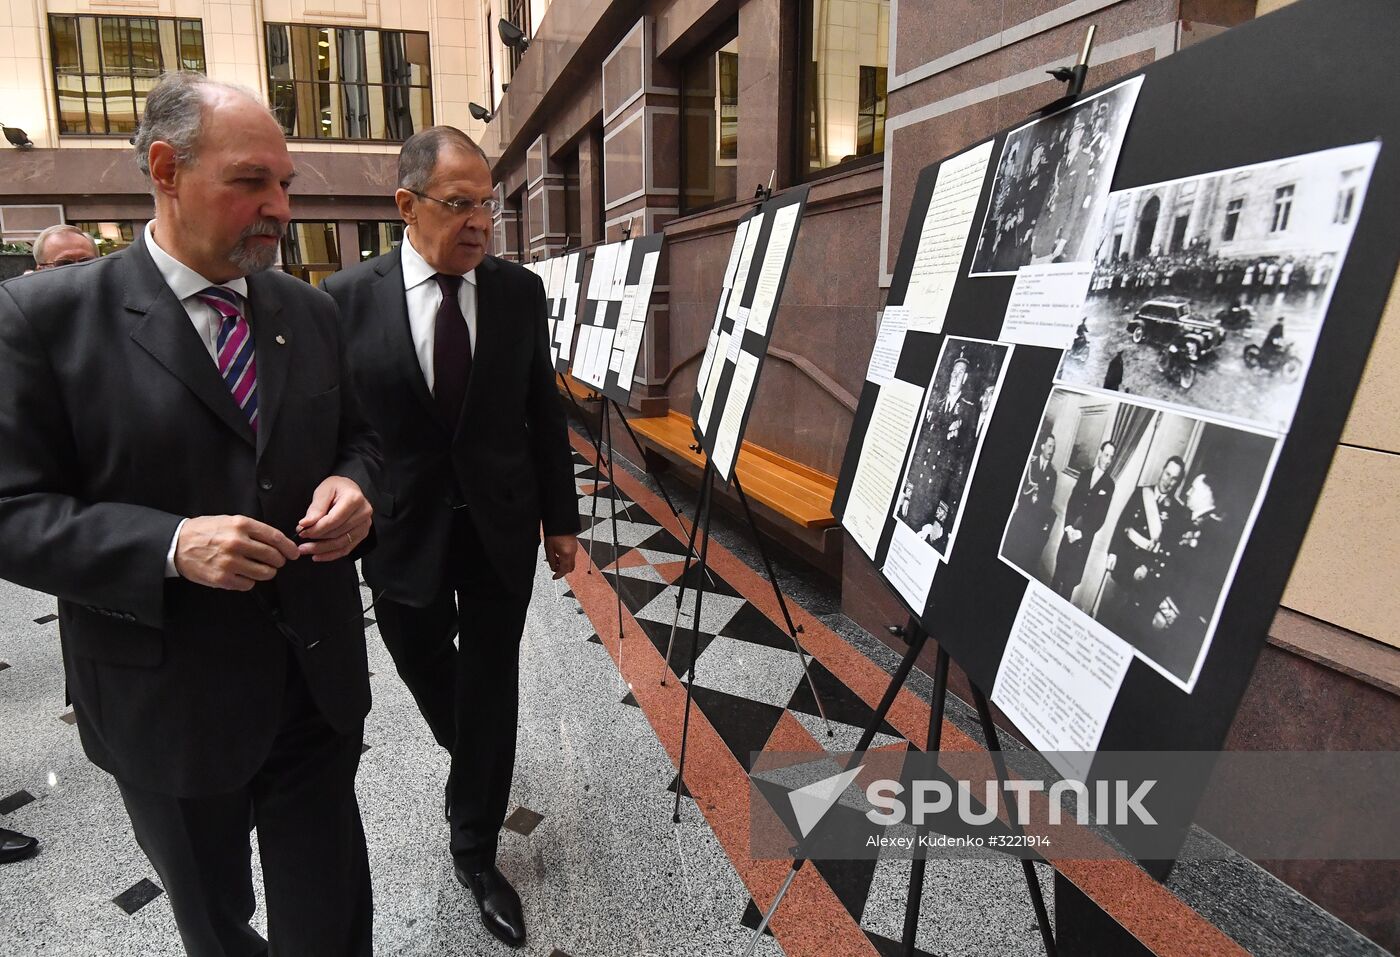 Exhibition of Russian and Argentine foreign ministries' archives opens